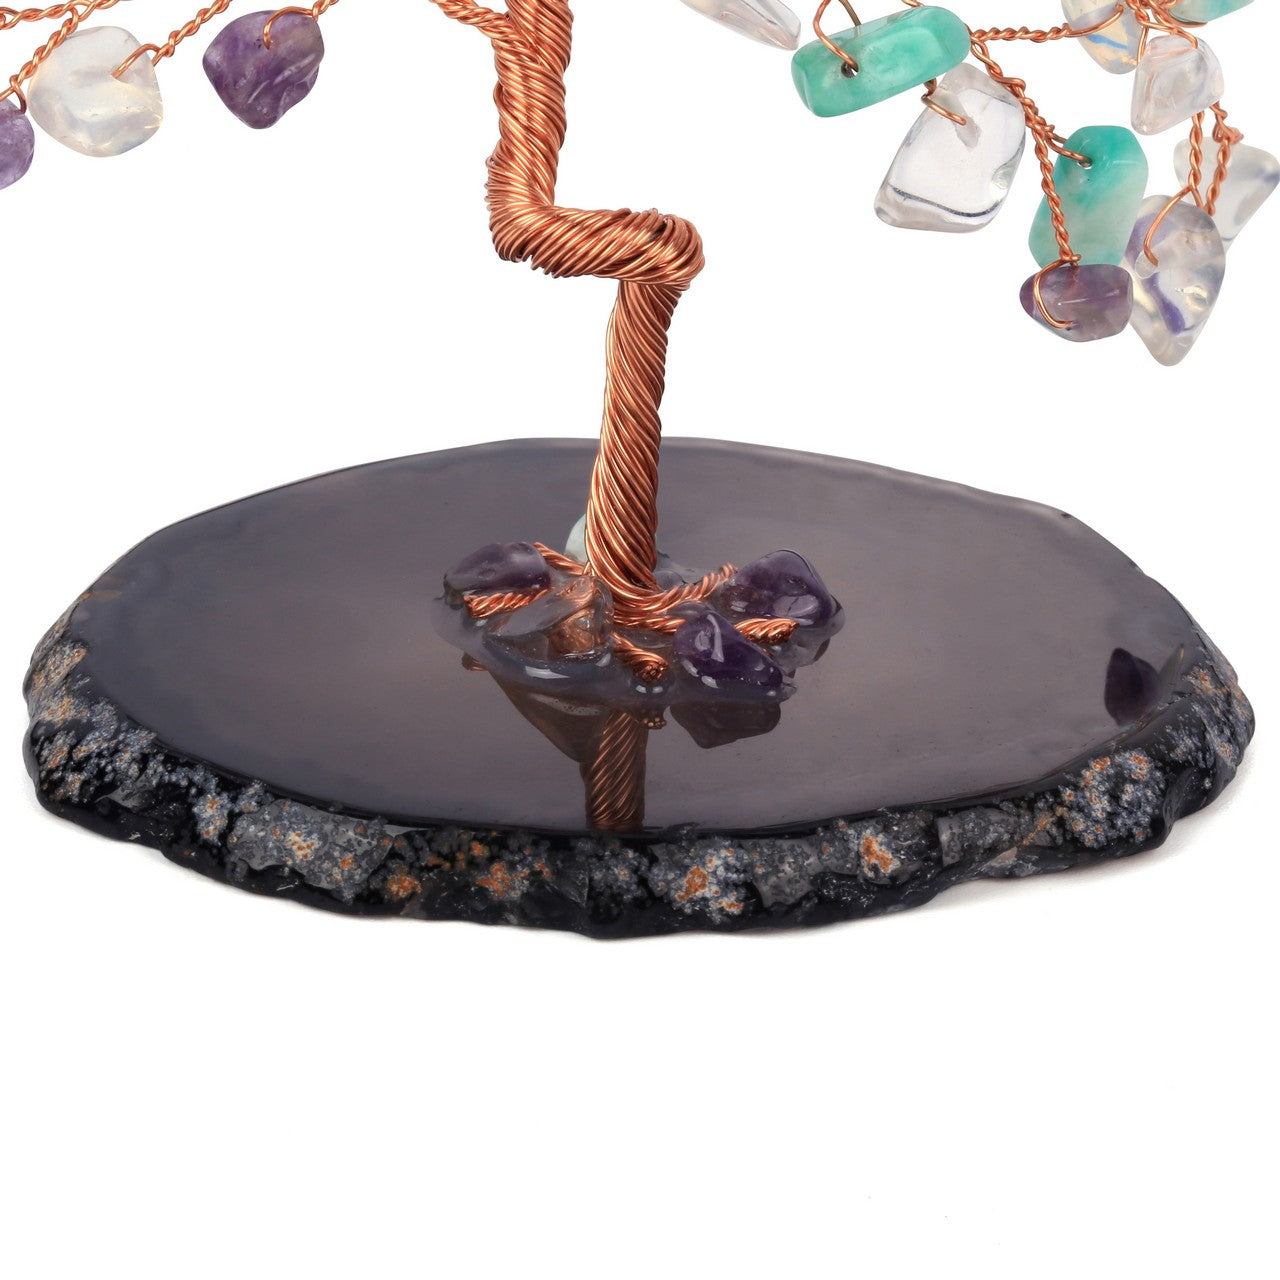 Healing Crystals Money Tree with Base Feng Shui Ornament | Jovivi